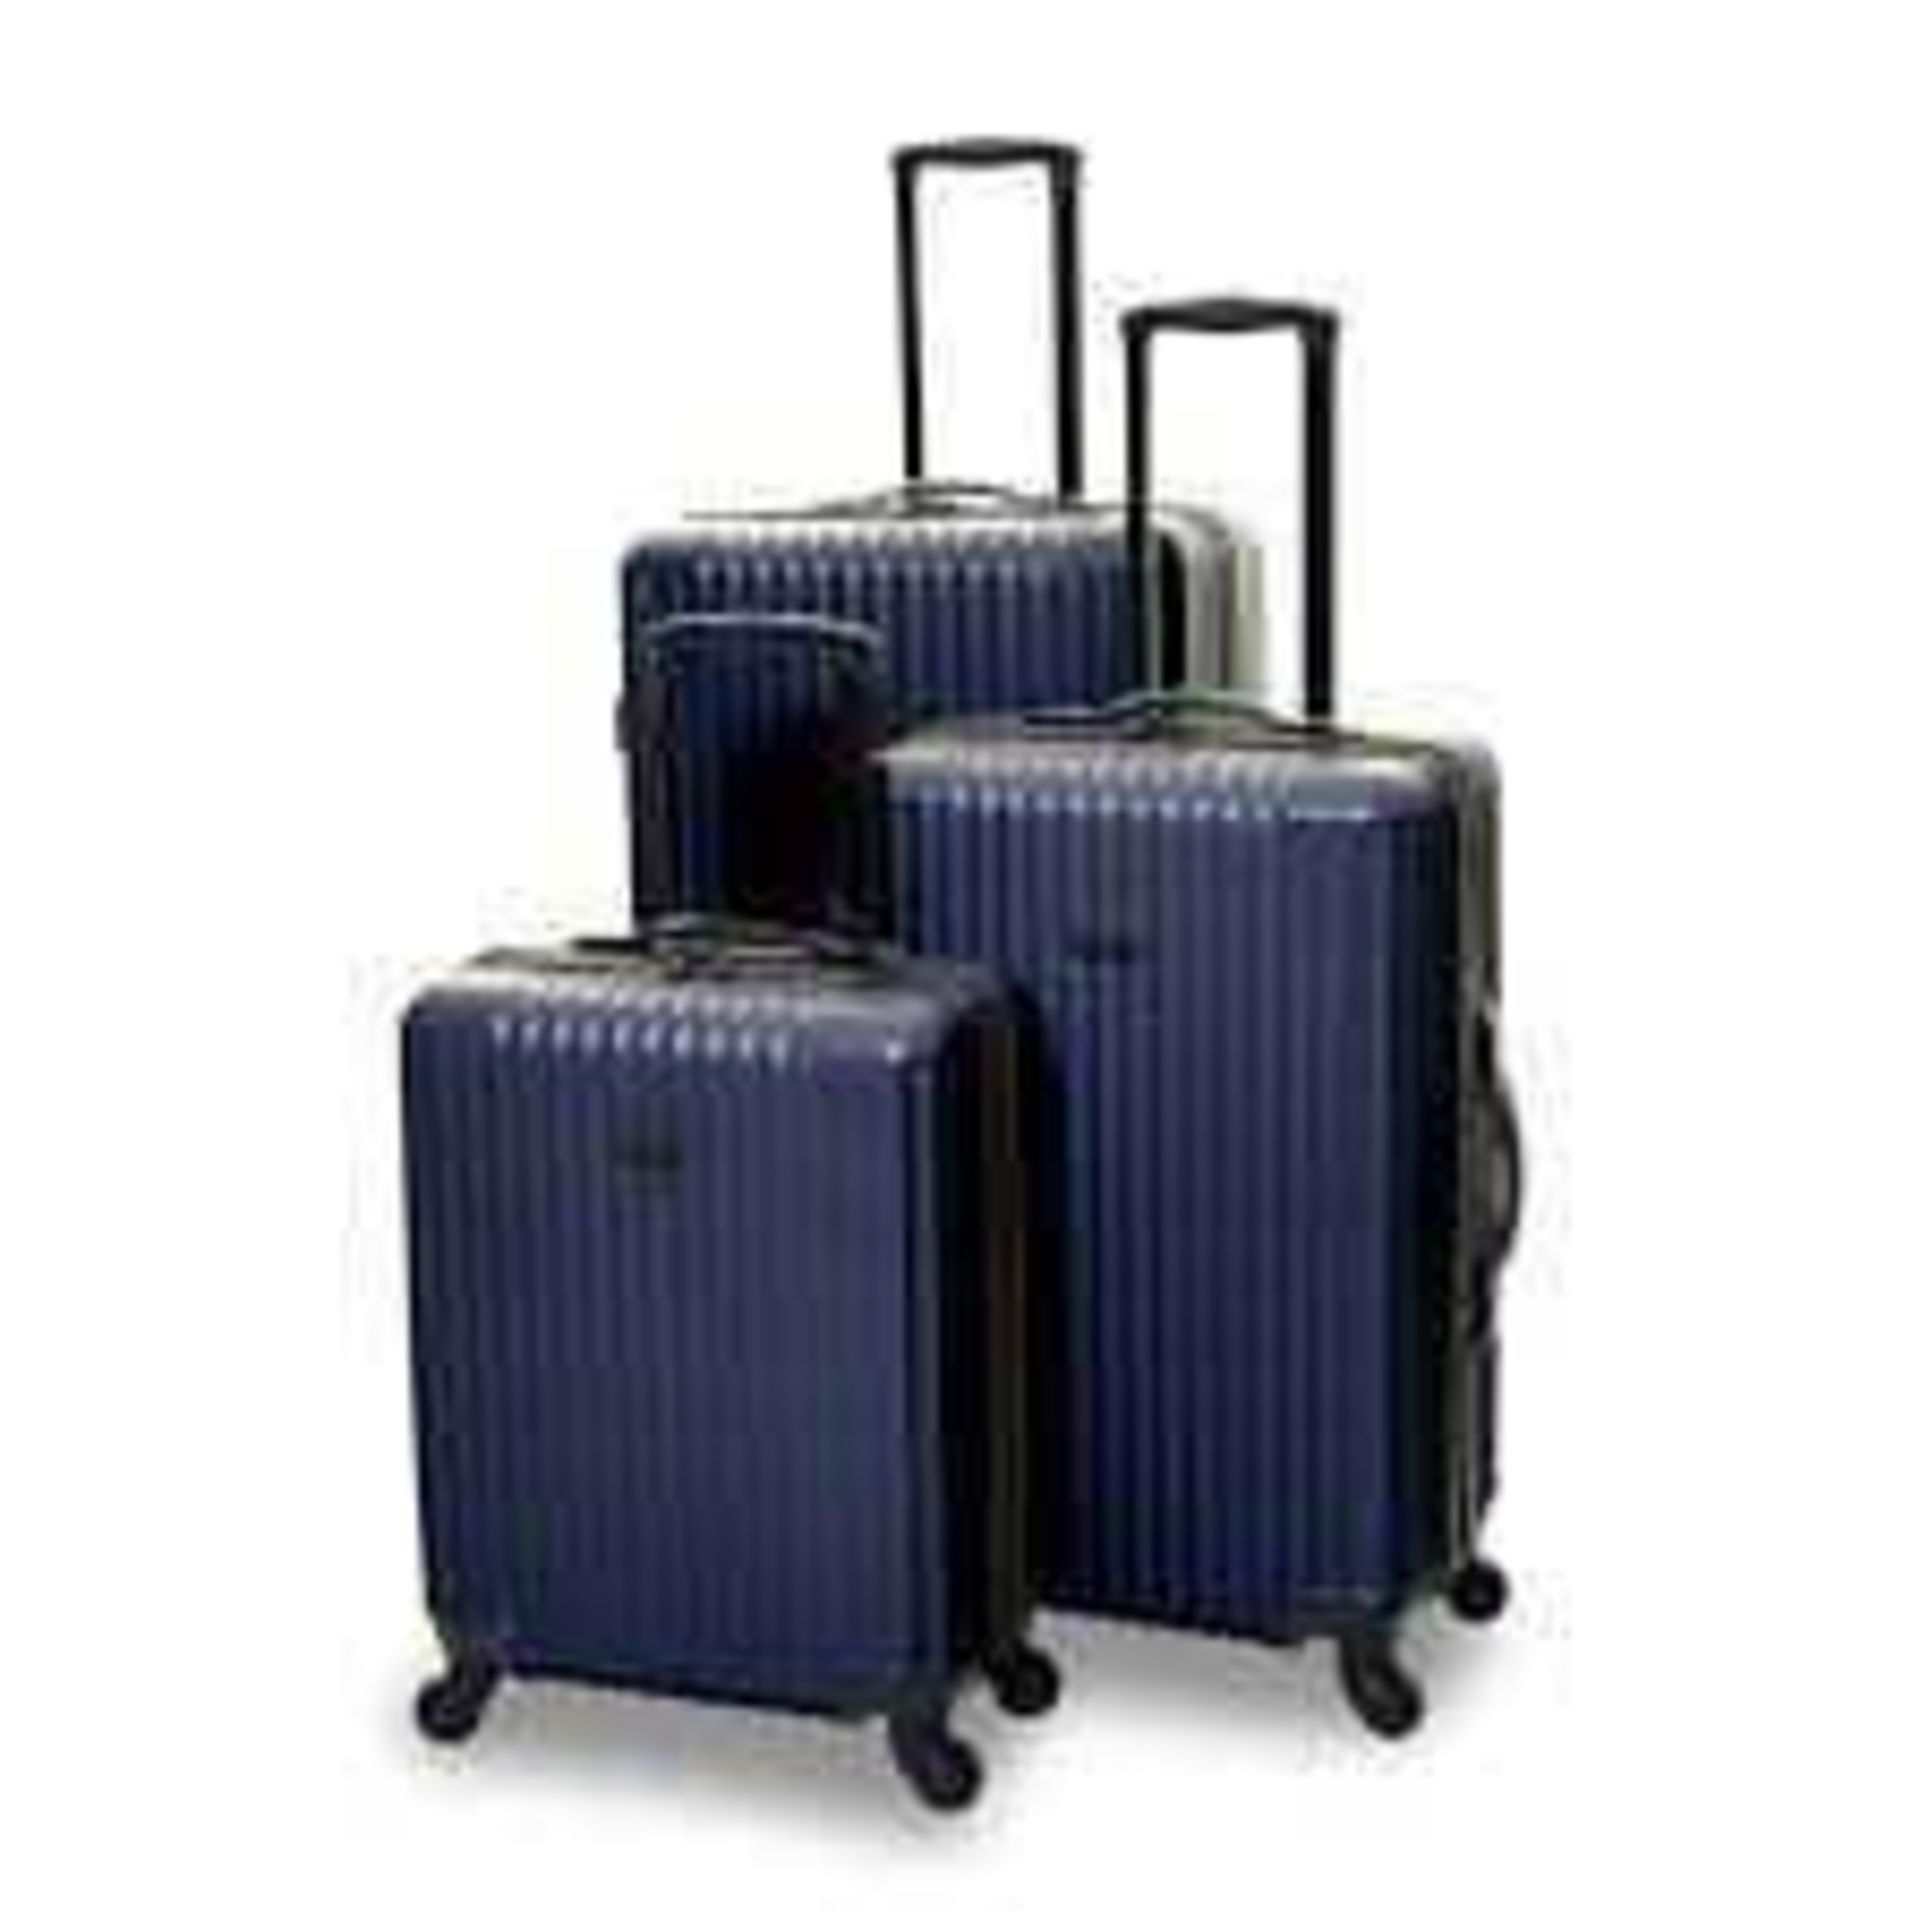 RRP £60 Cube Hardshell 360 Wheel Sholay Luggage Suitcase In Navy Blue 634973 (Apprasials Are